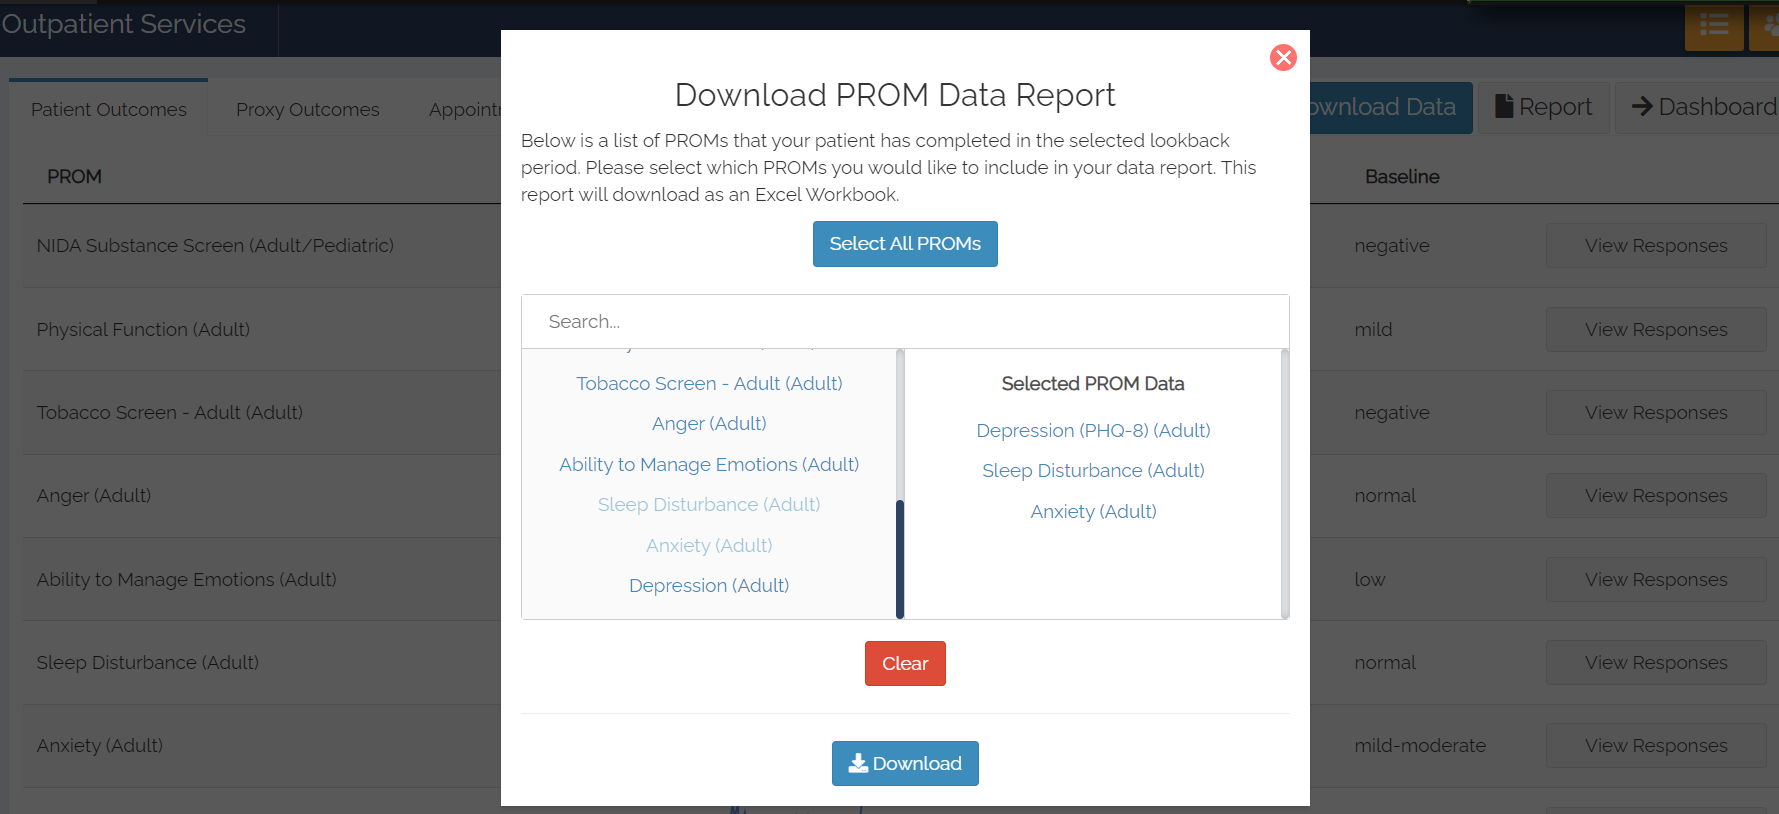 PROM selection for the PROM data download